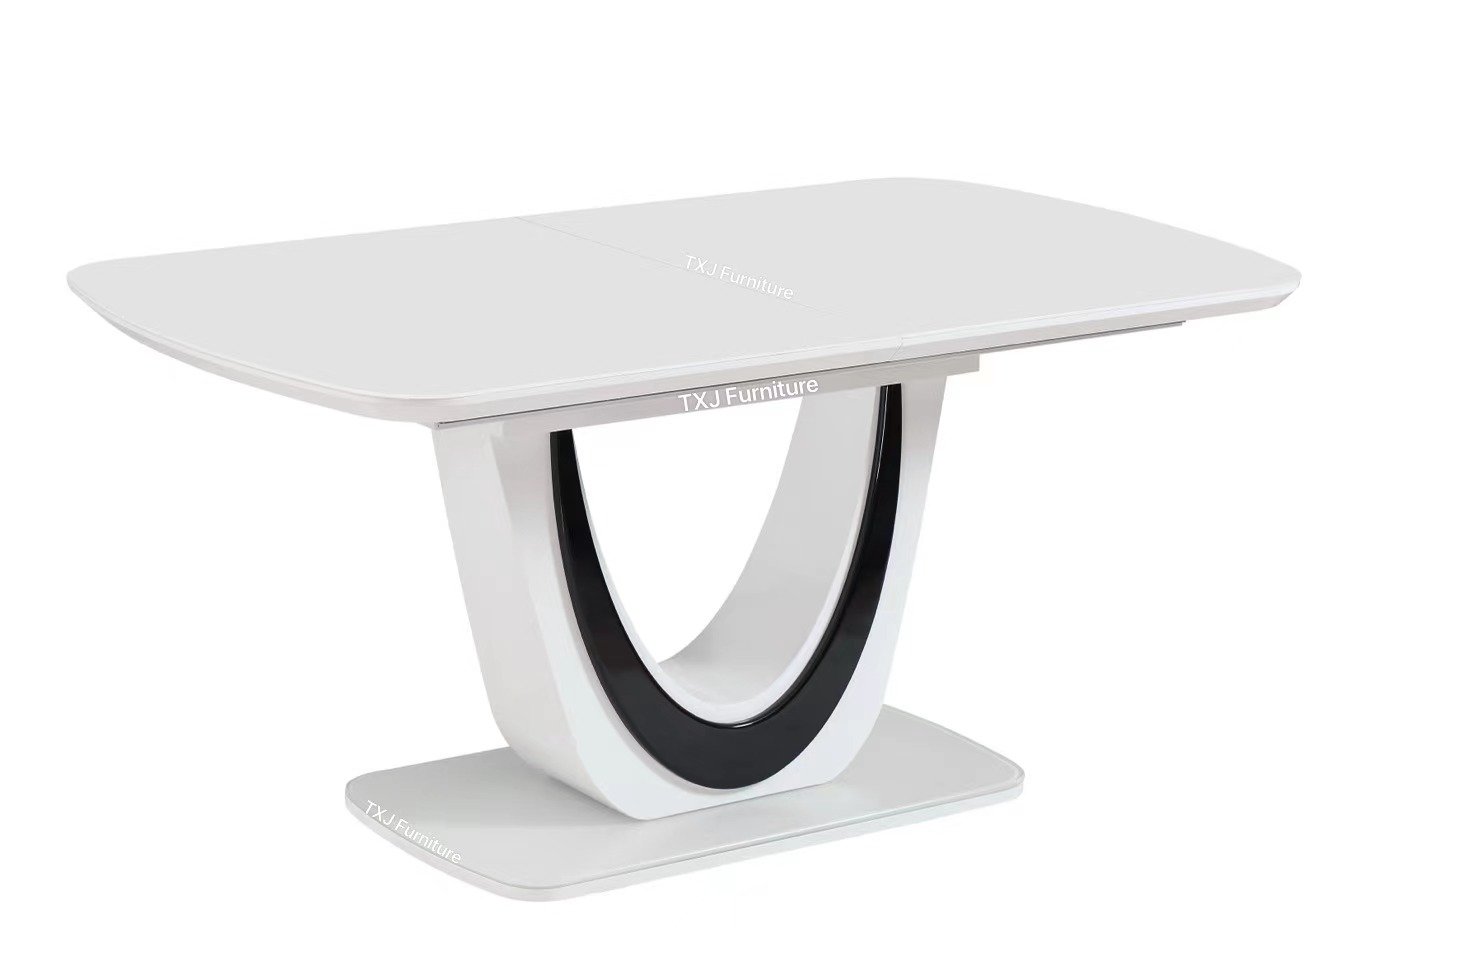 Hot selling Dining Table Extension Table TD-2055 Featured Image